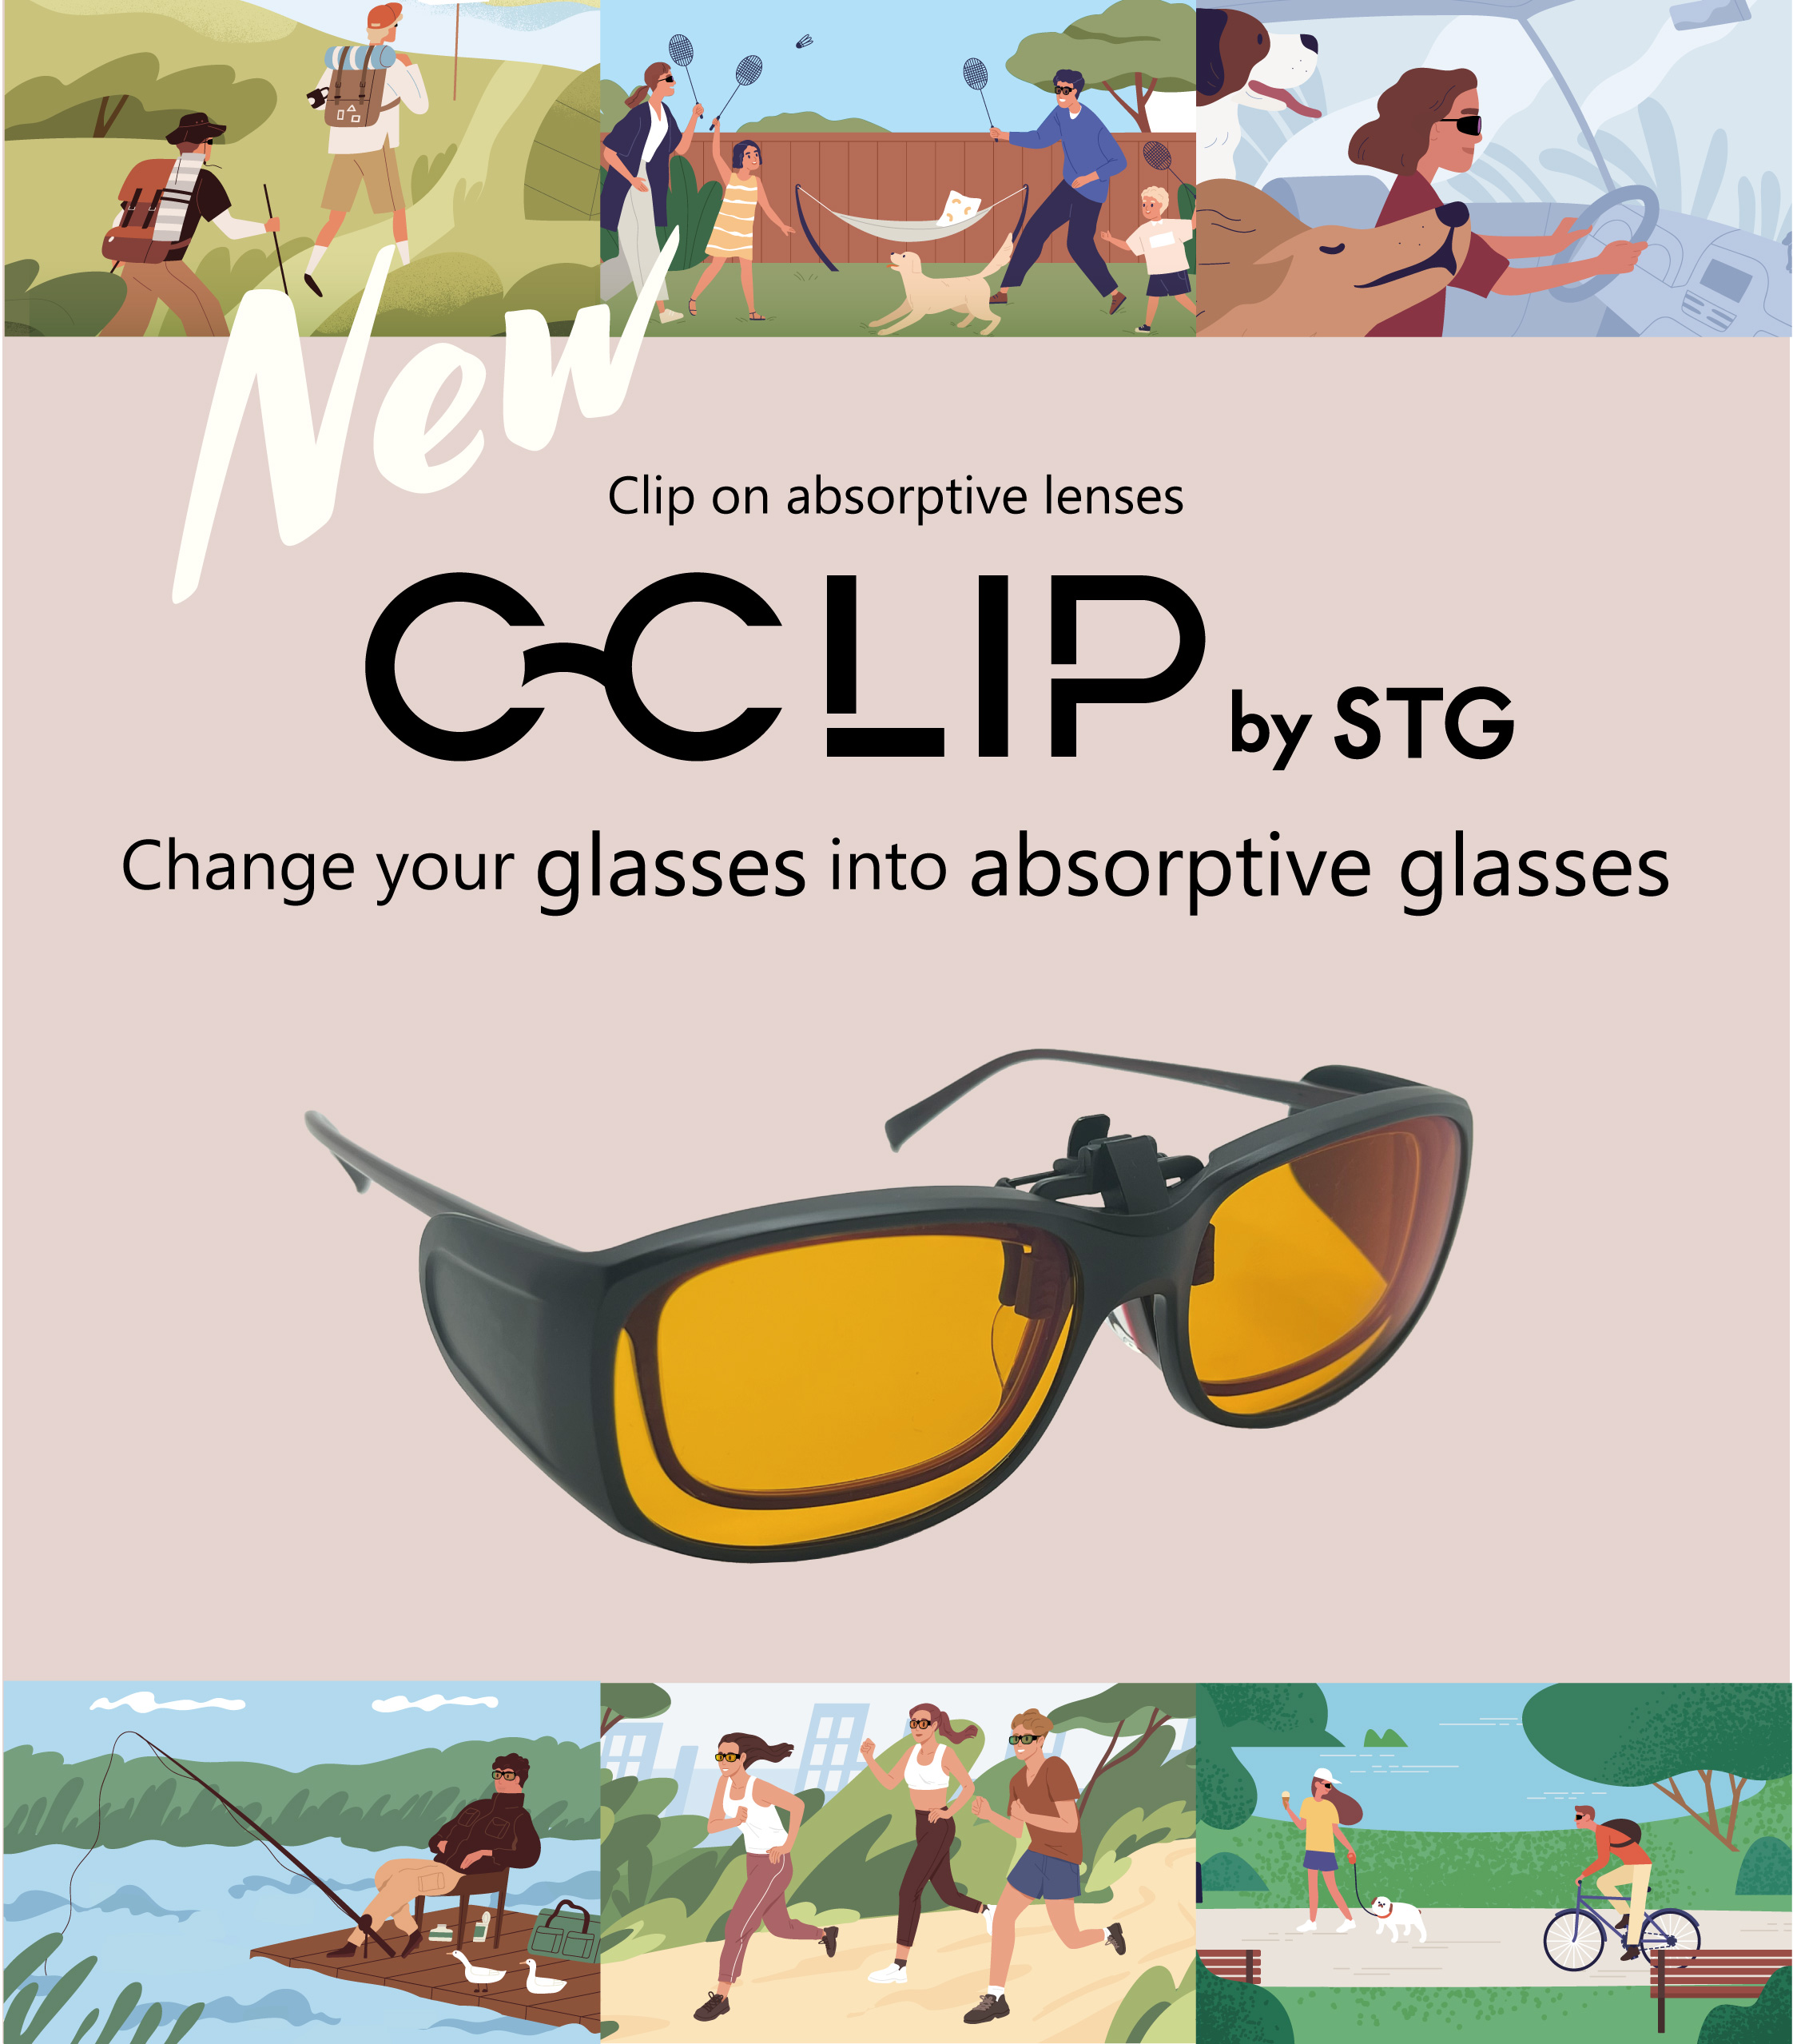 Change your glasses into absorptive glasses